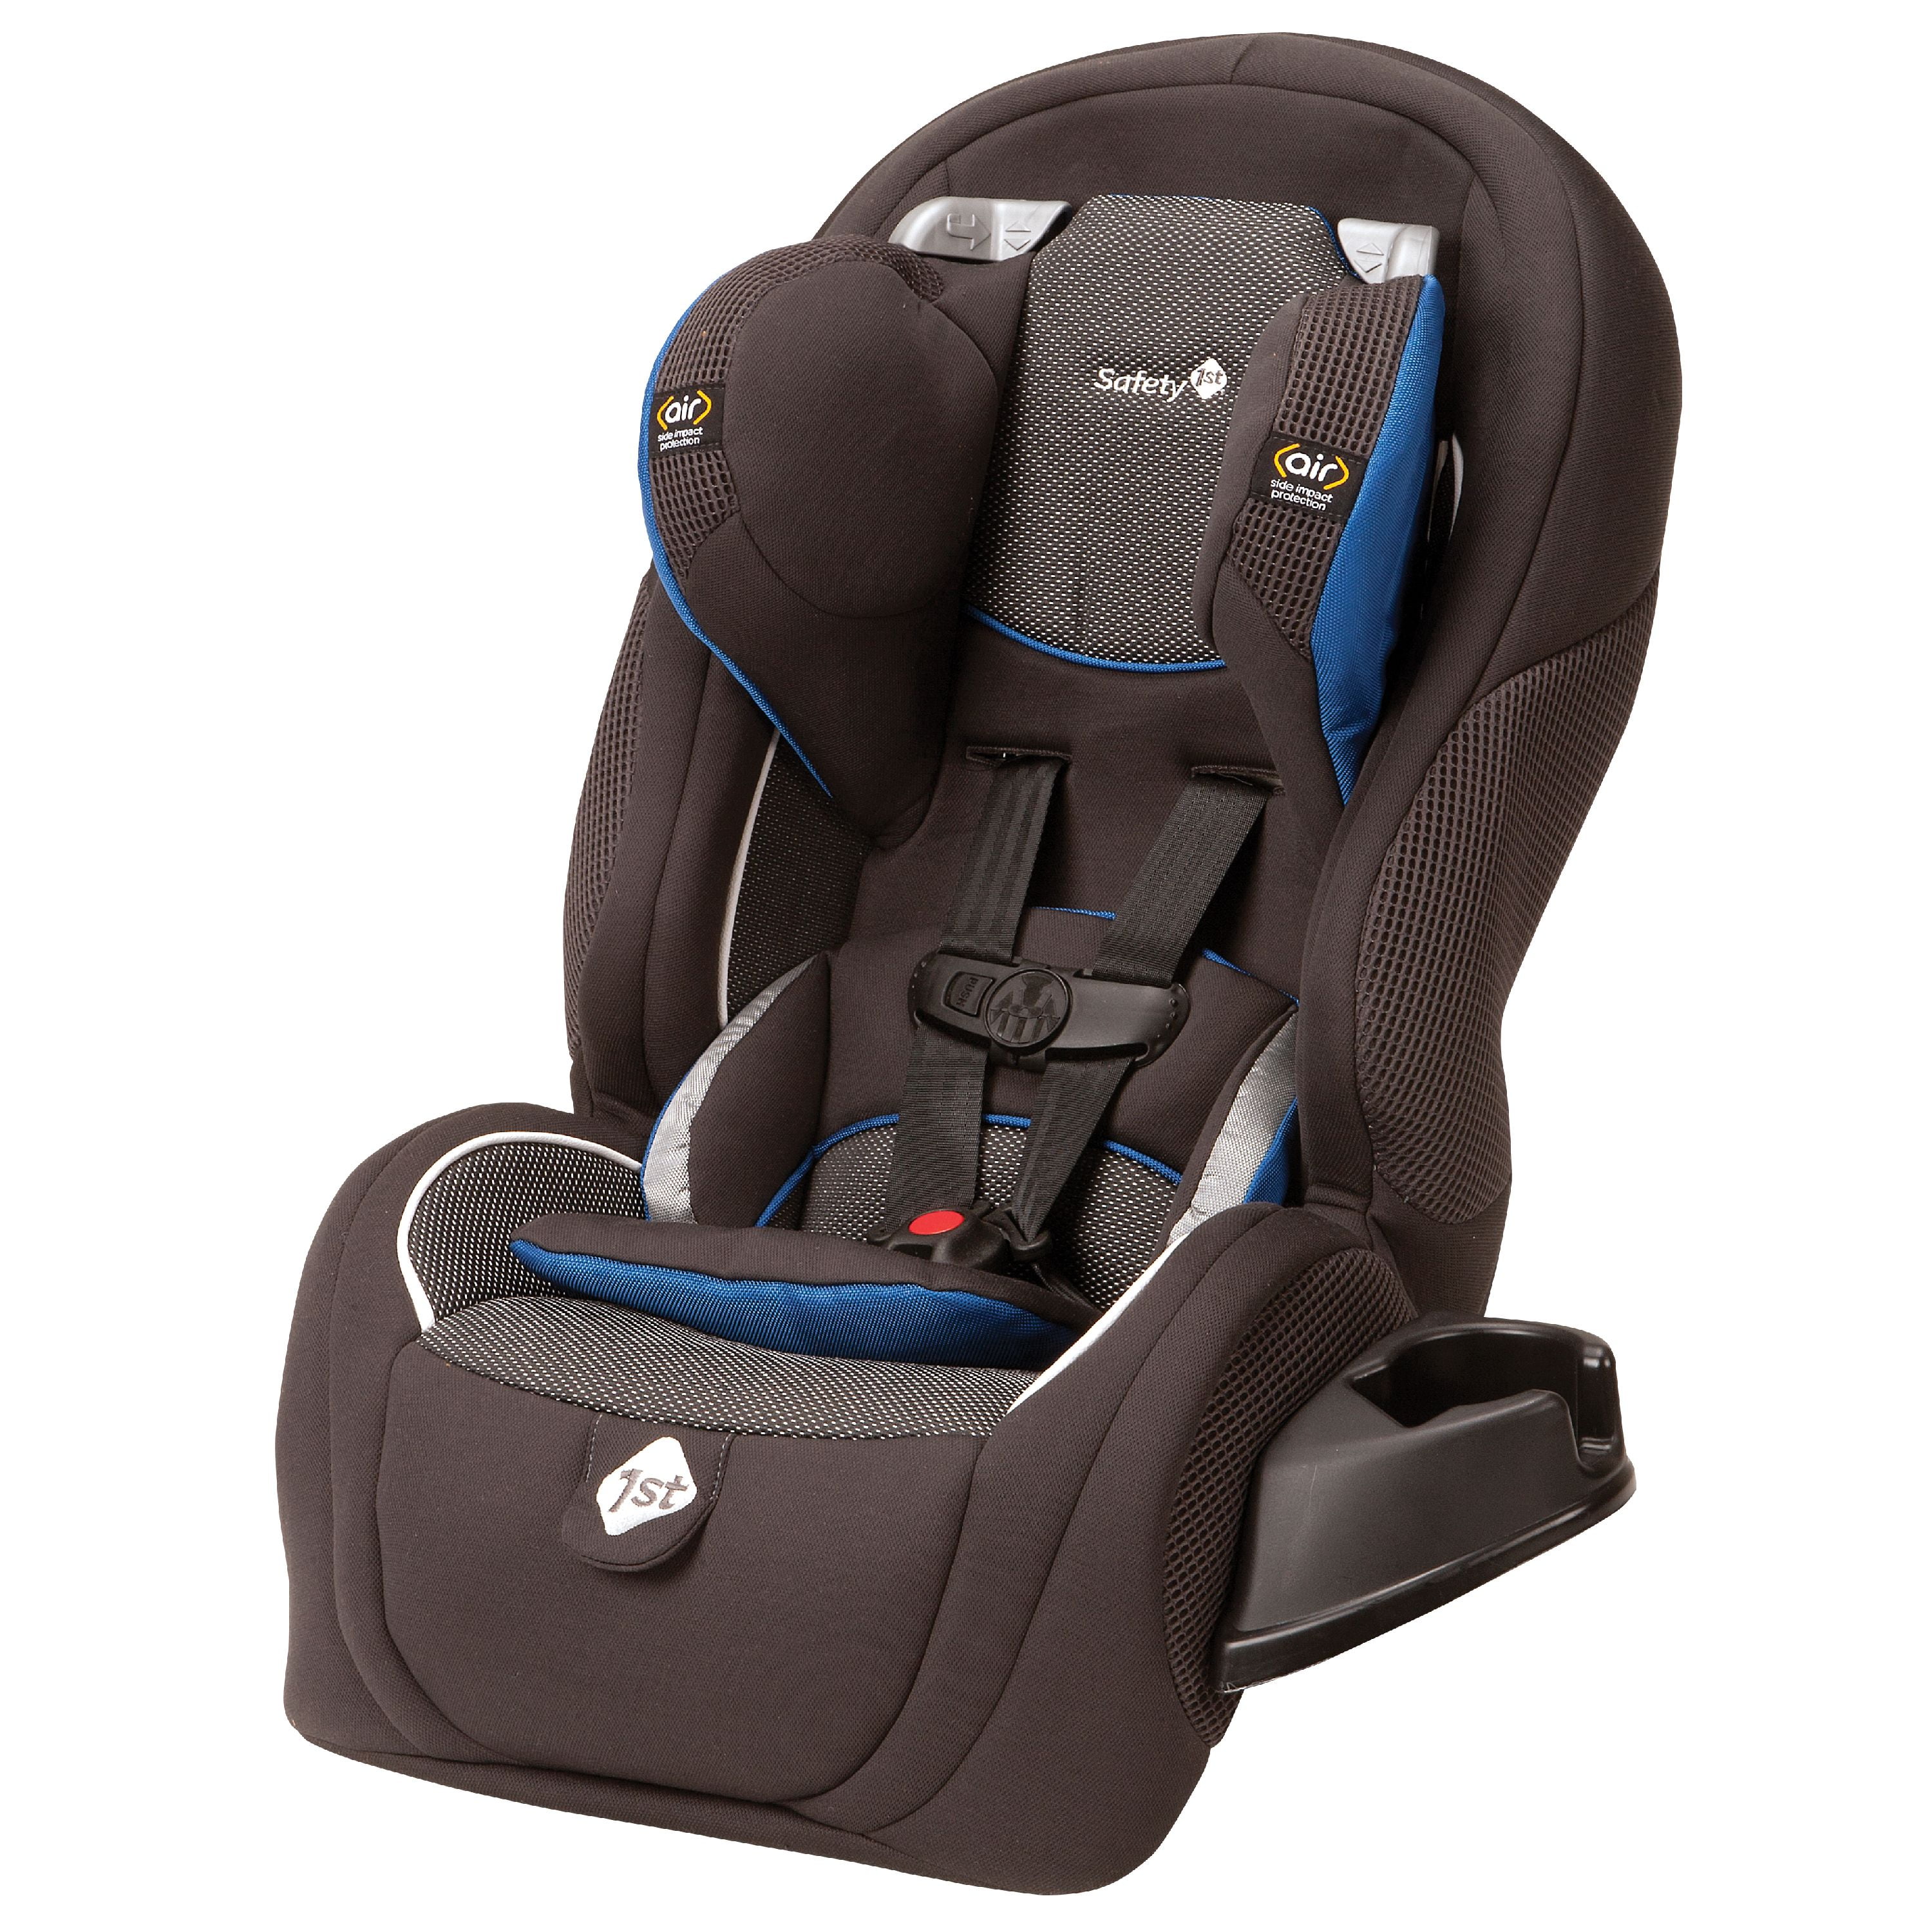 Safety 1st Complete Air 65 Convertible Car Seat, York - Walmart.com